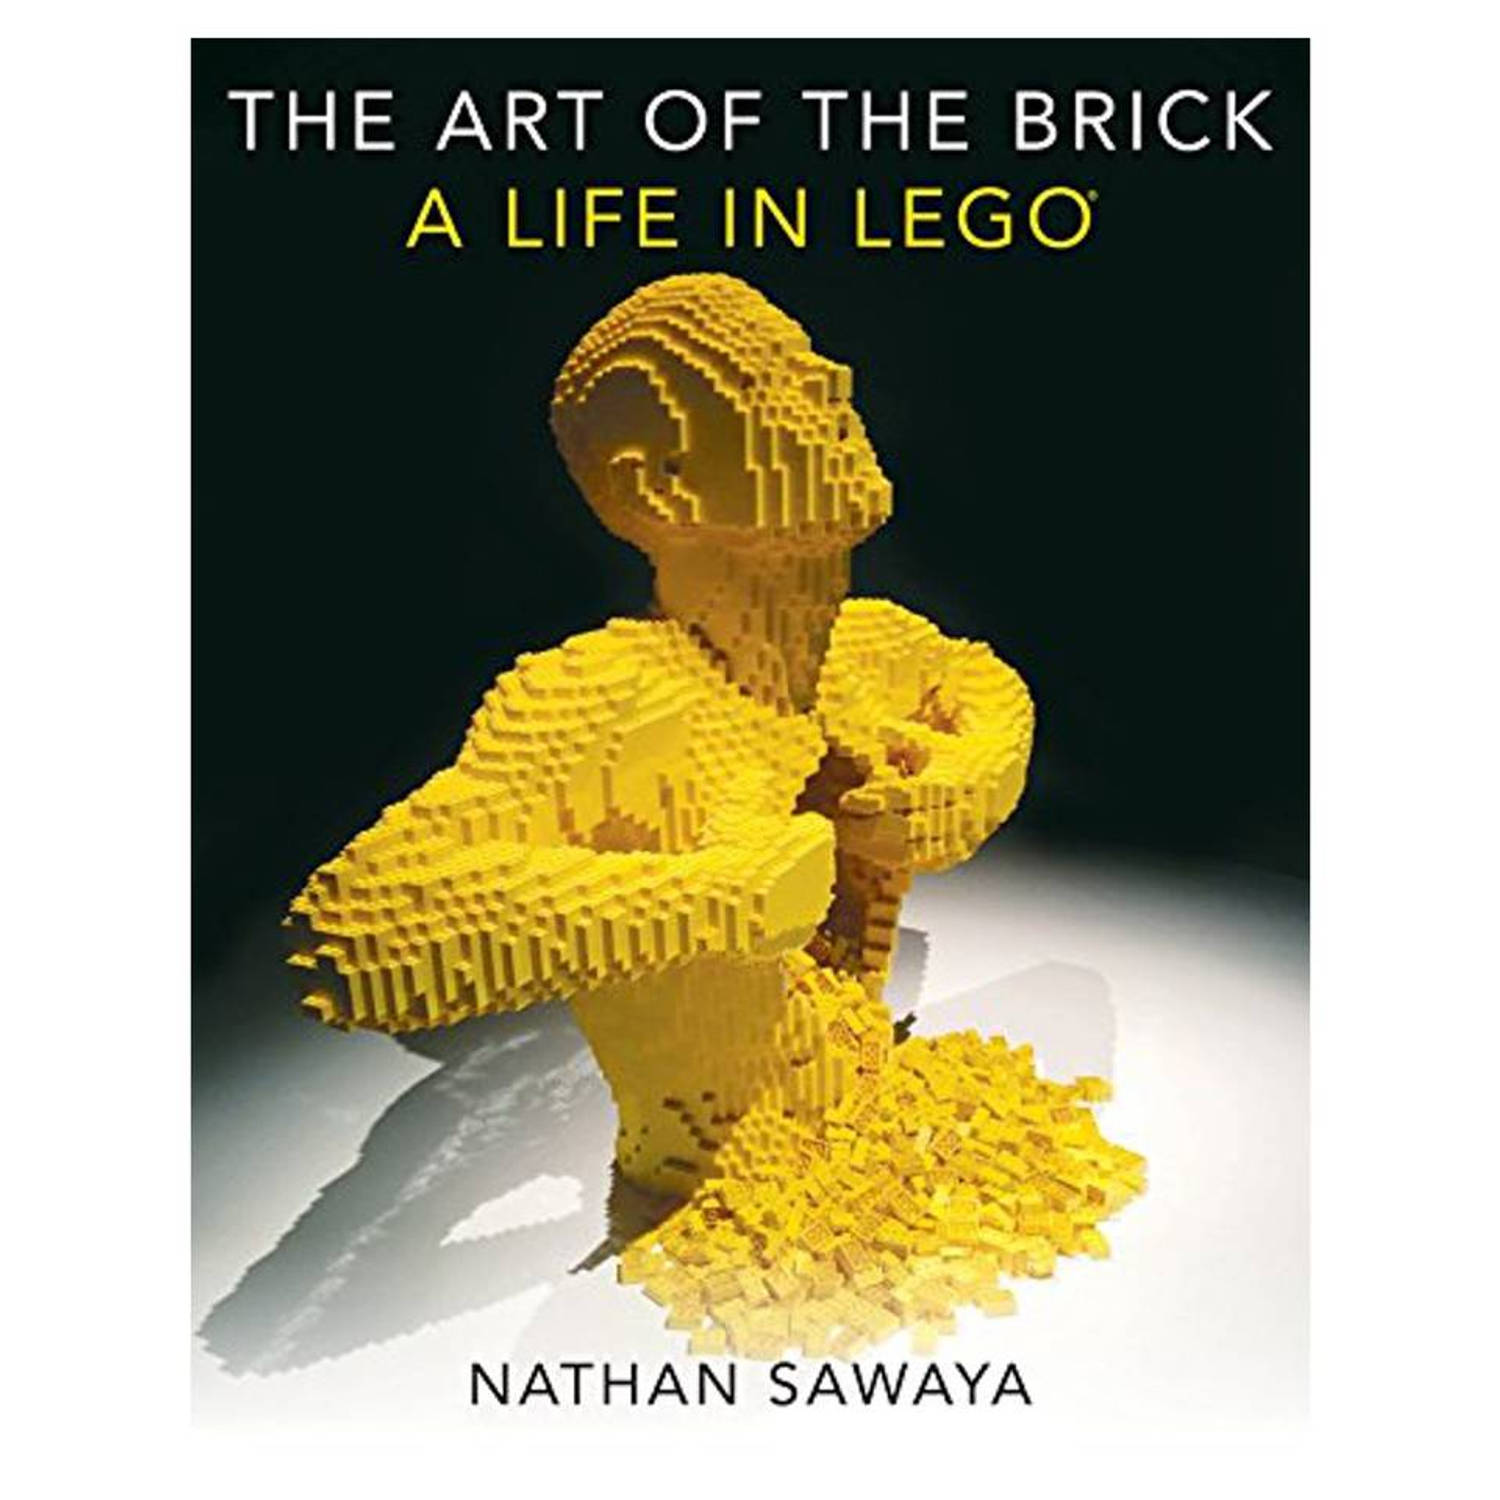 Lego 275884 the art of the brick a life in lego [en]